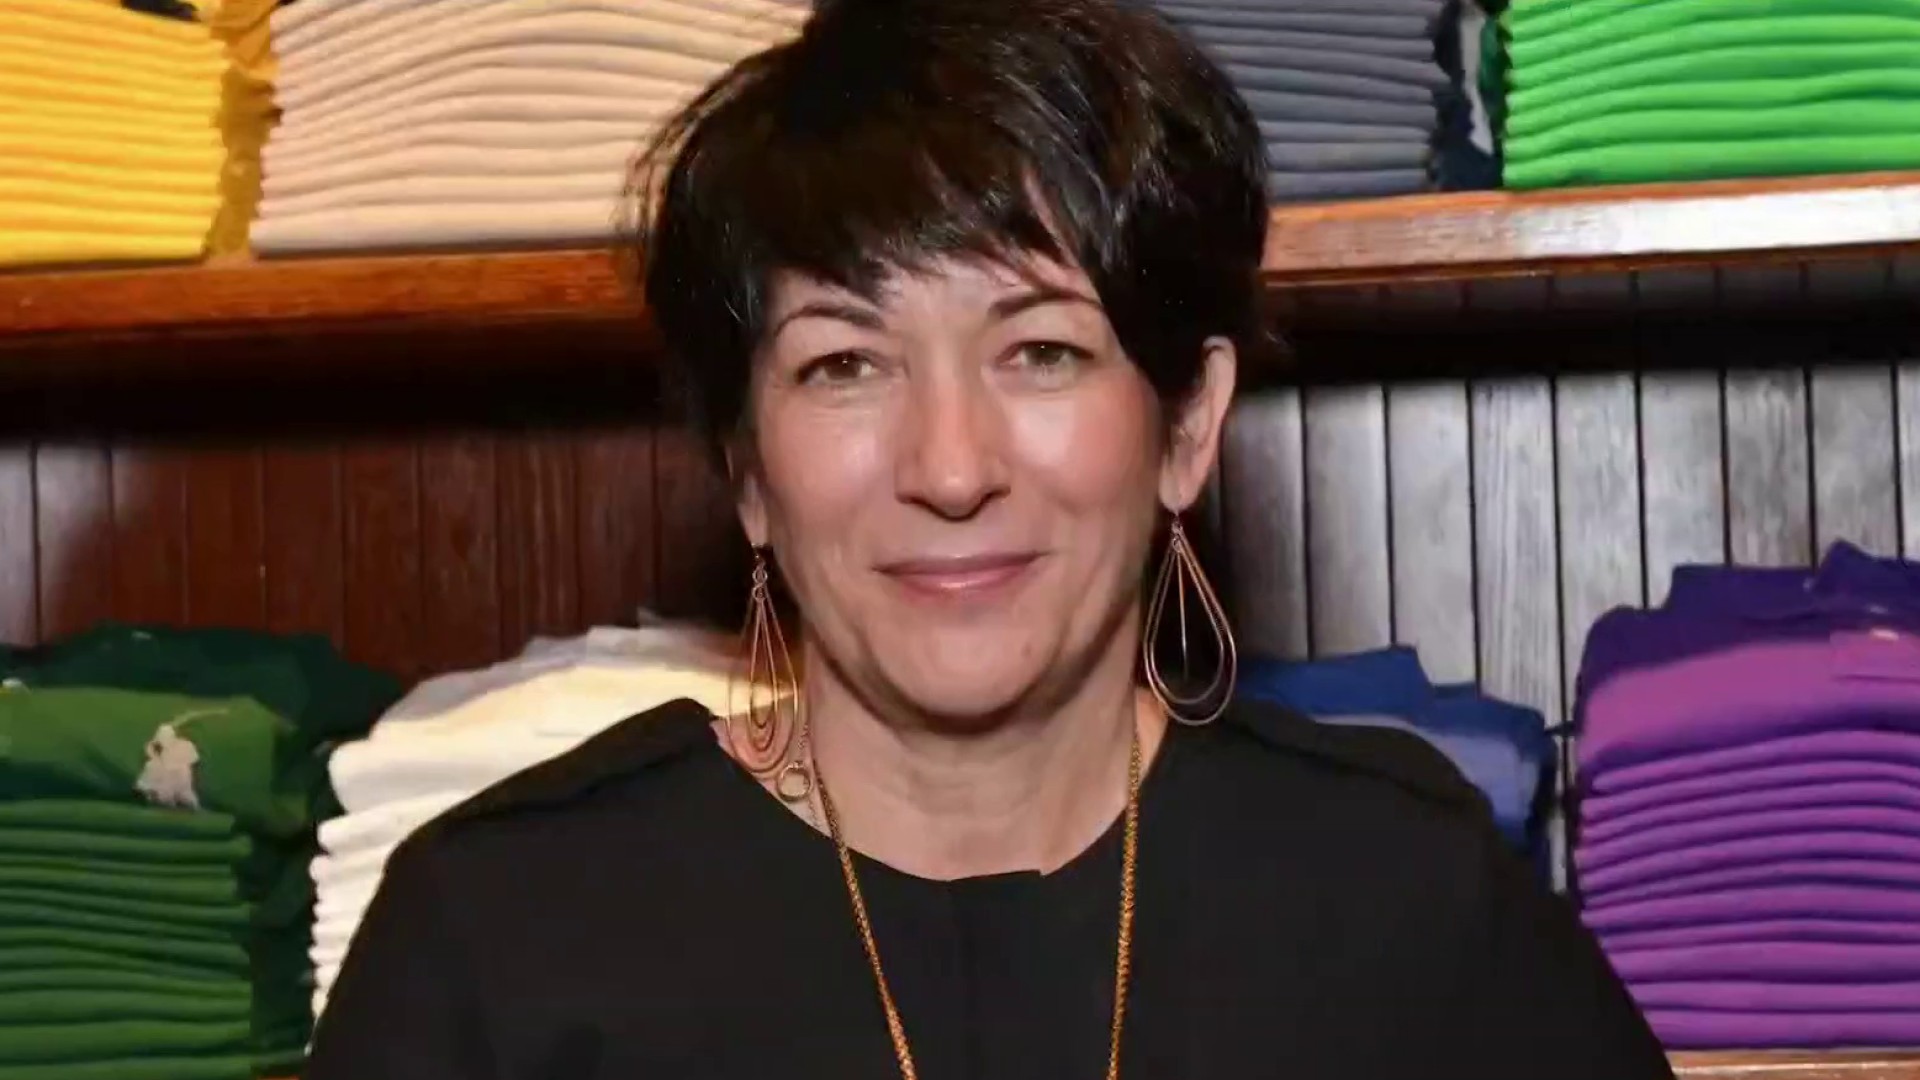 Ghislaine Maxwell's brother claims she's mistreated in prison